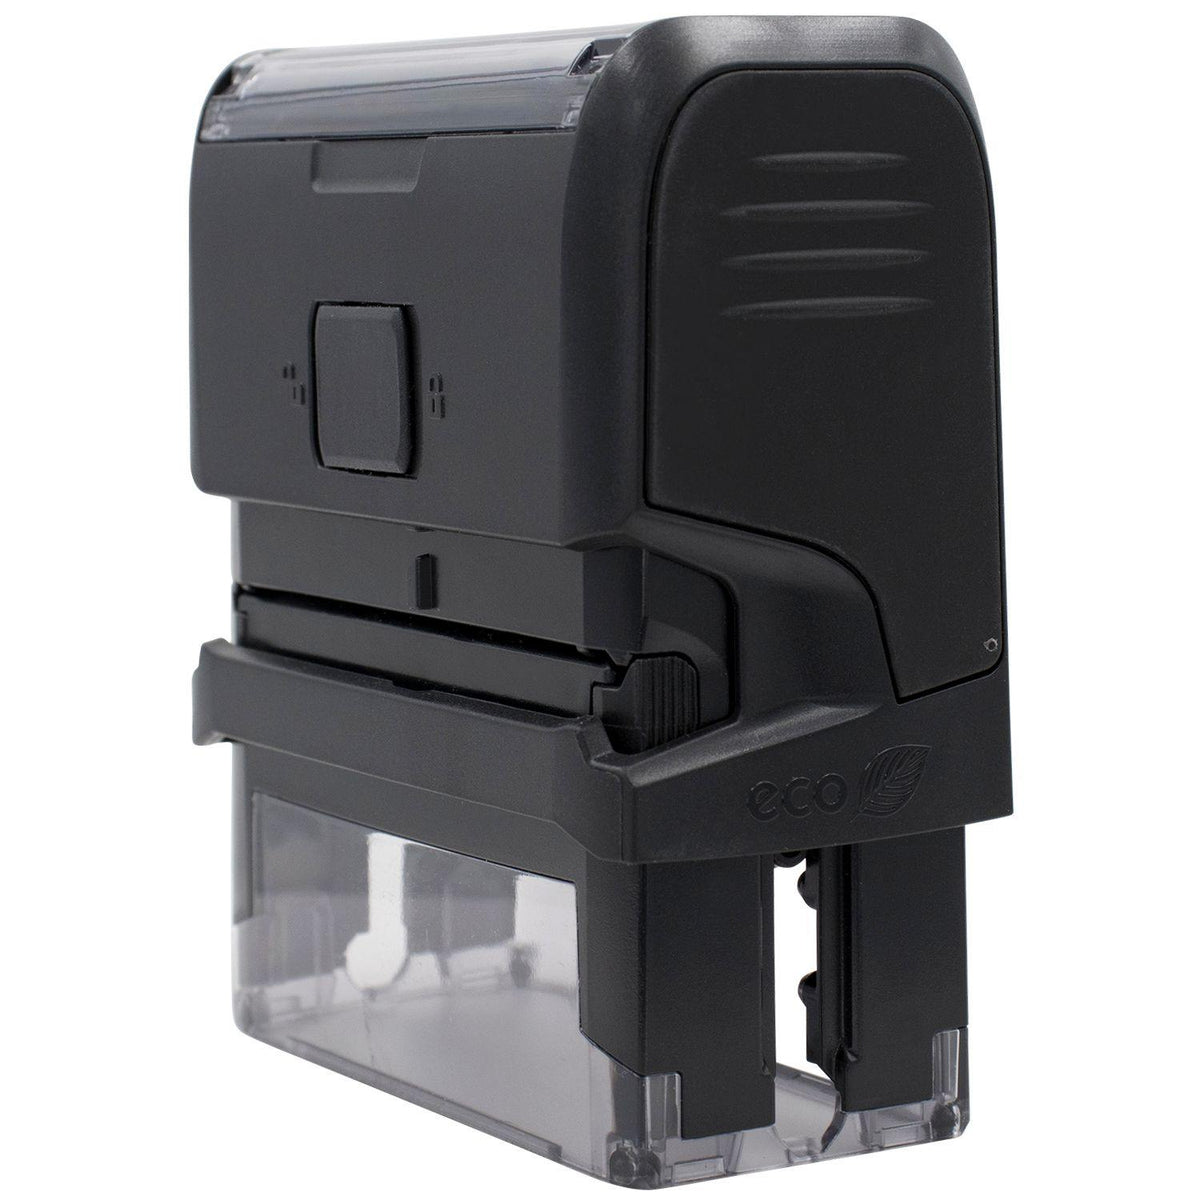 Large Self Inking Creditors Exhibit Stamp - Engineer Seal Stamps - Brand_Trodat, Impression Size_Large, Stamp Type_Self-Inking Stamp, Type of Use_Finance